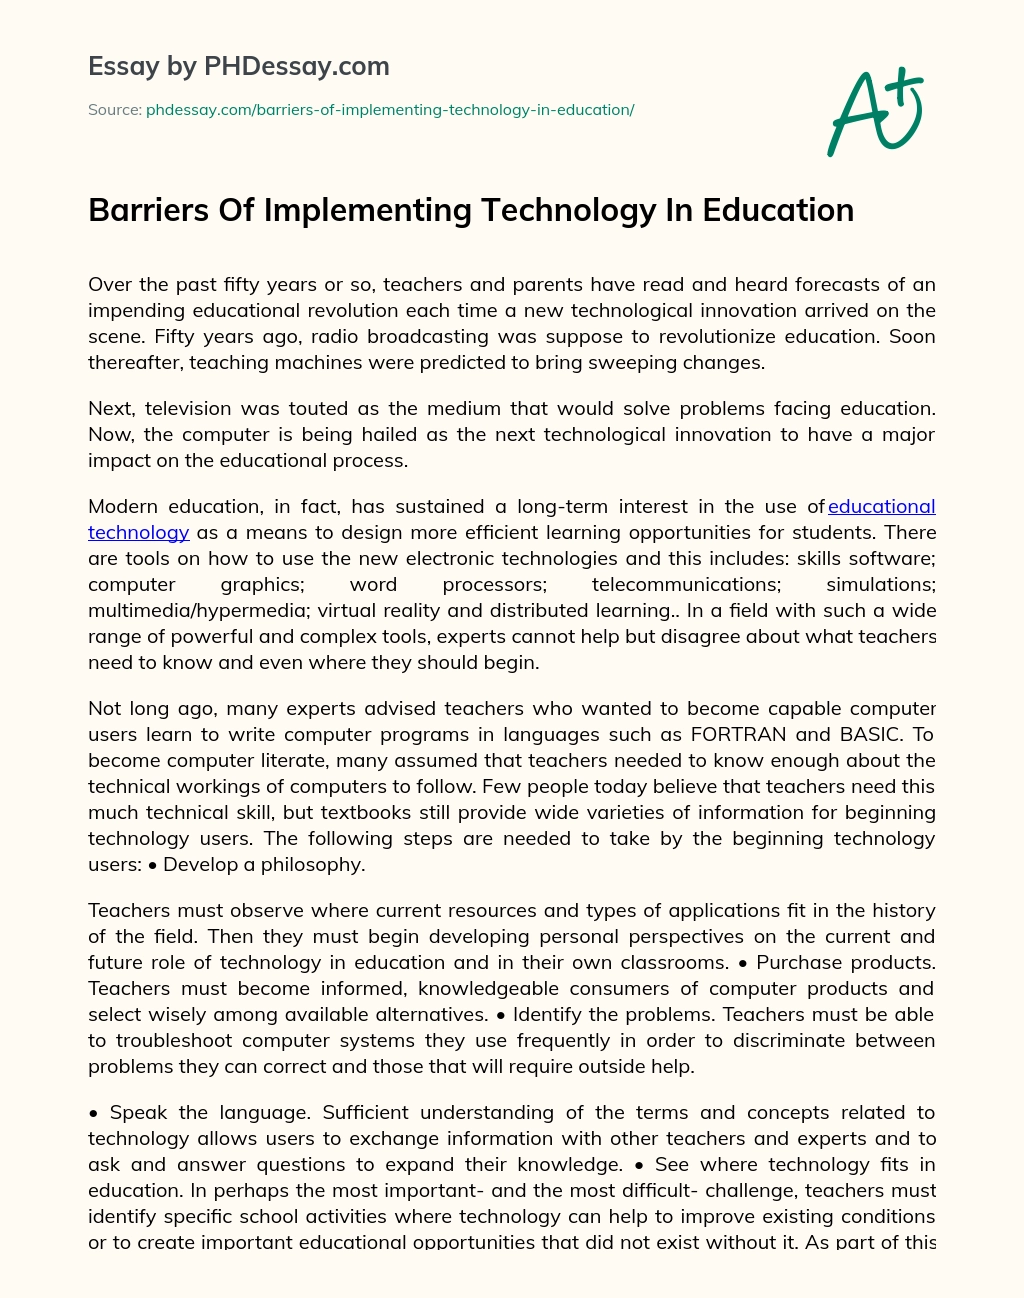 Barriers Of Implementing Technology In Education essay